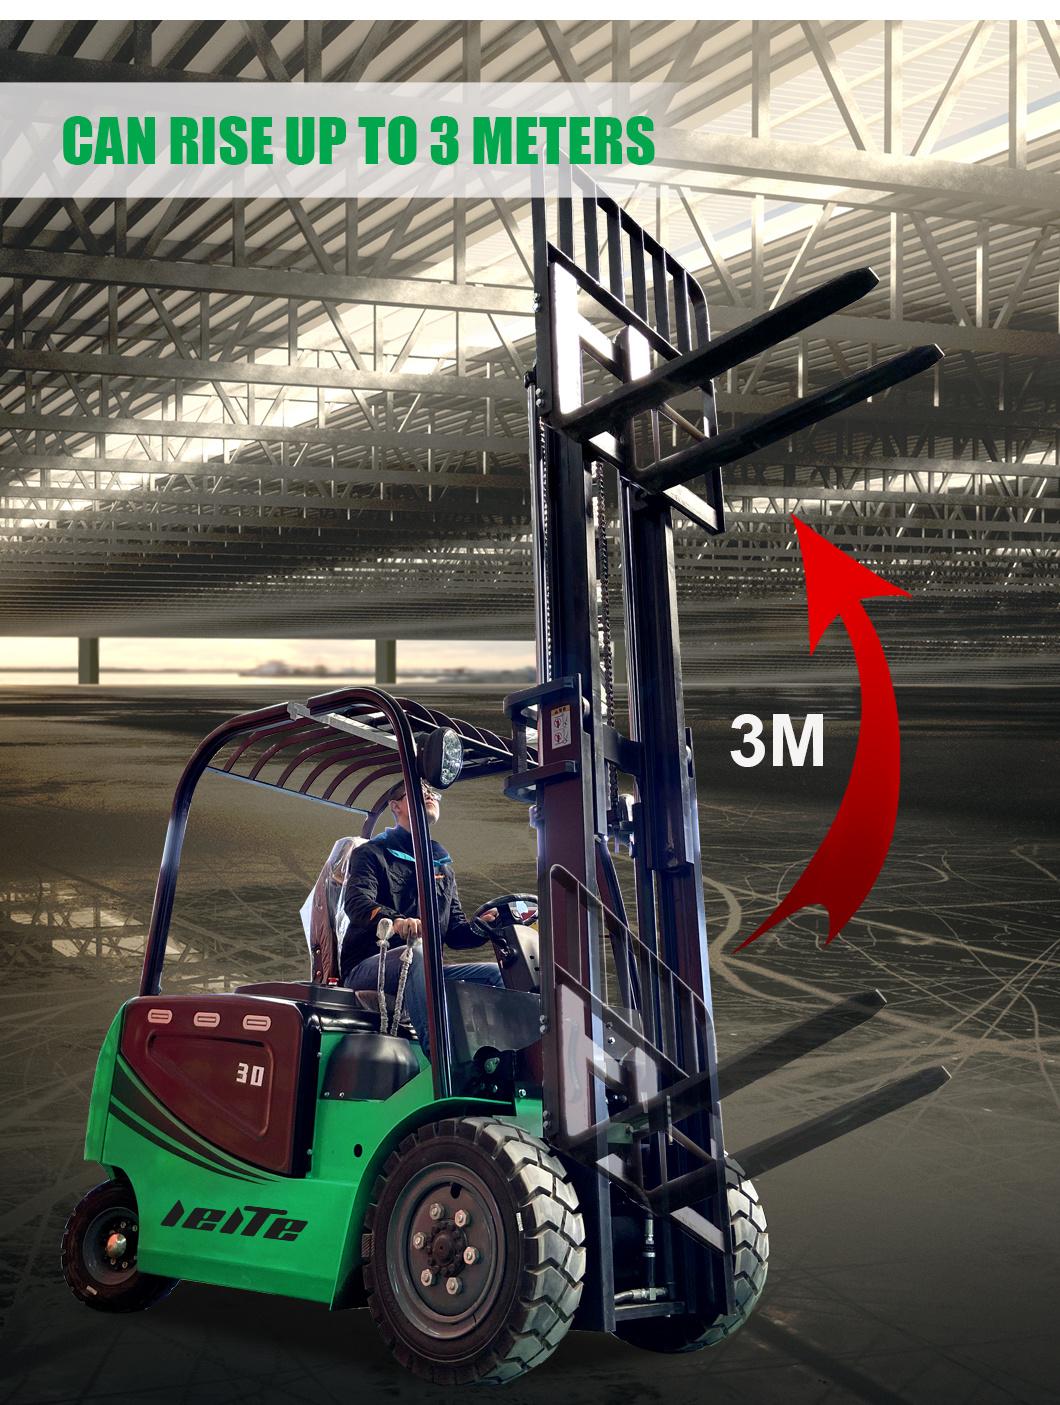 Small Cheap Price Mini Forklift for Warehouse 2 Ton Electric Forklift Electric Forklift Battery